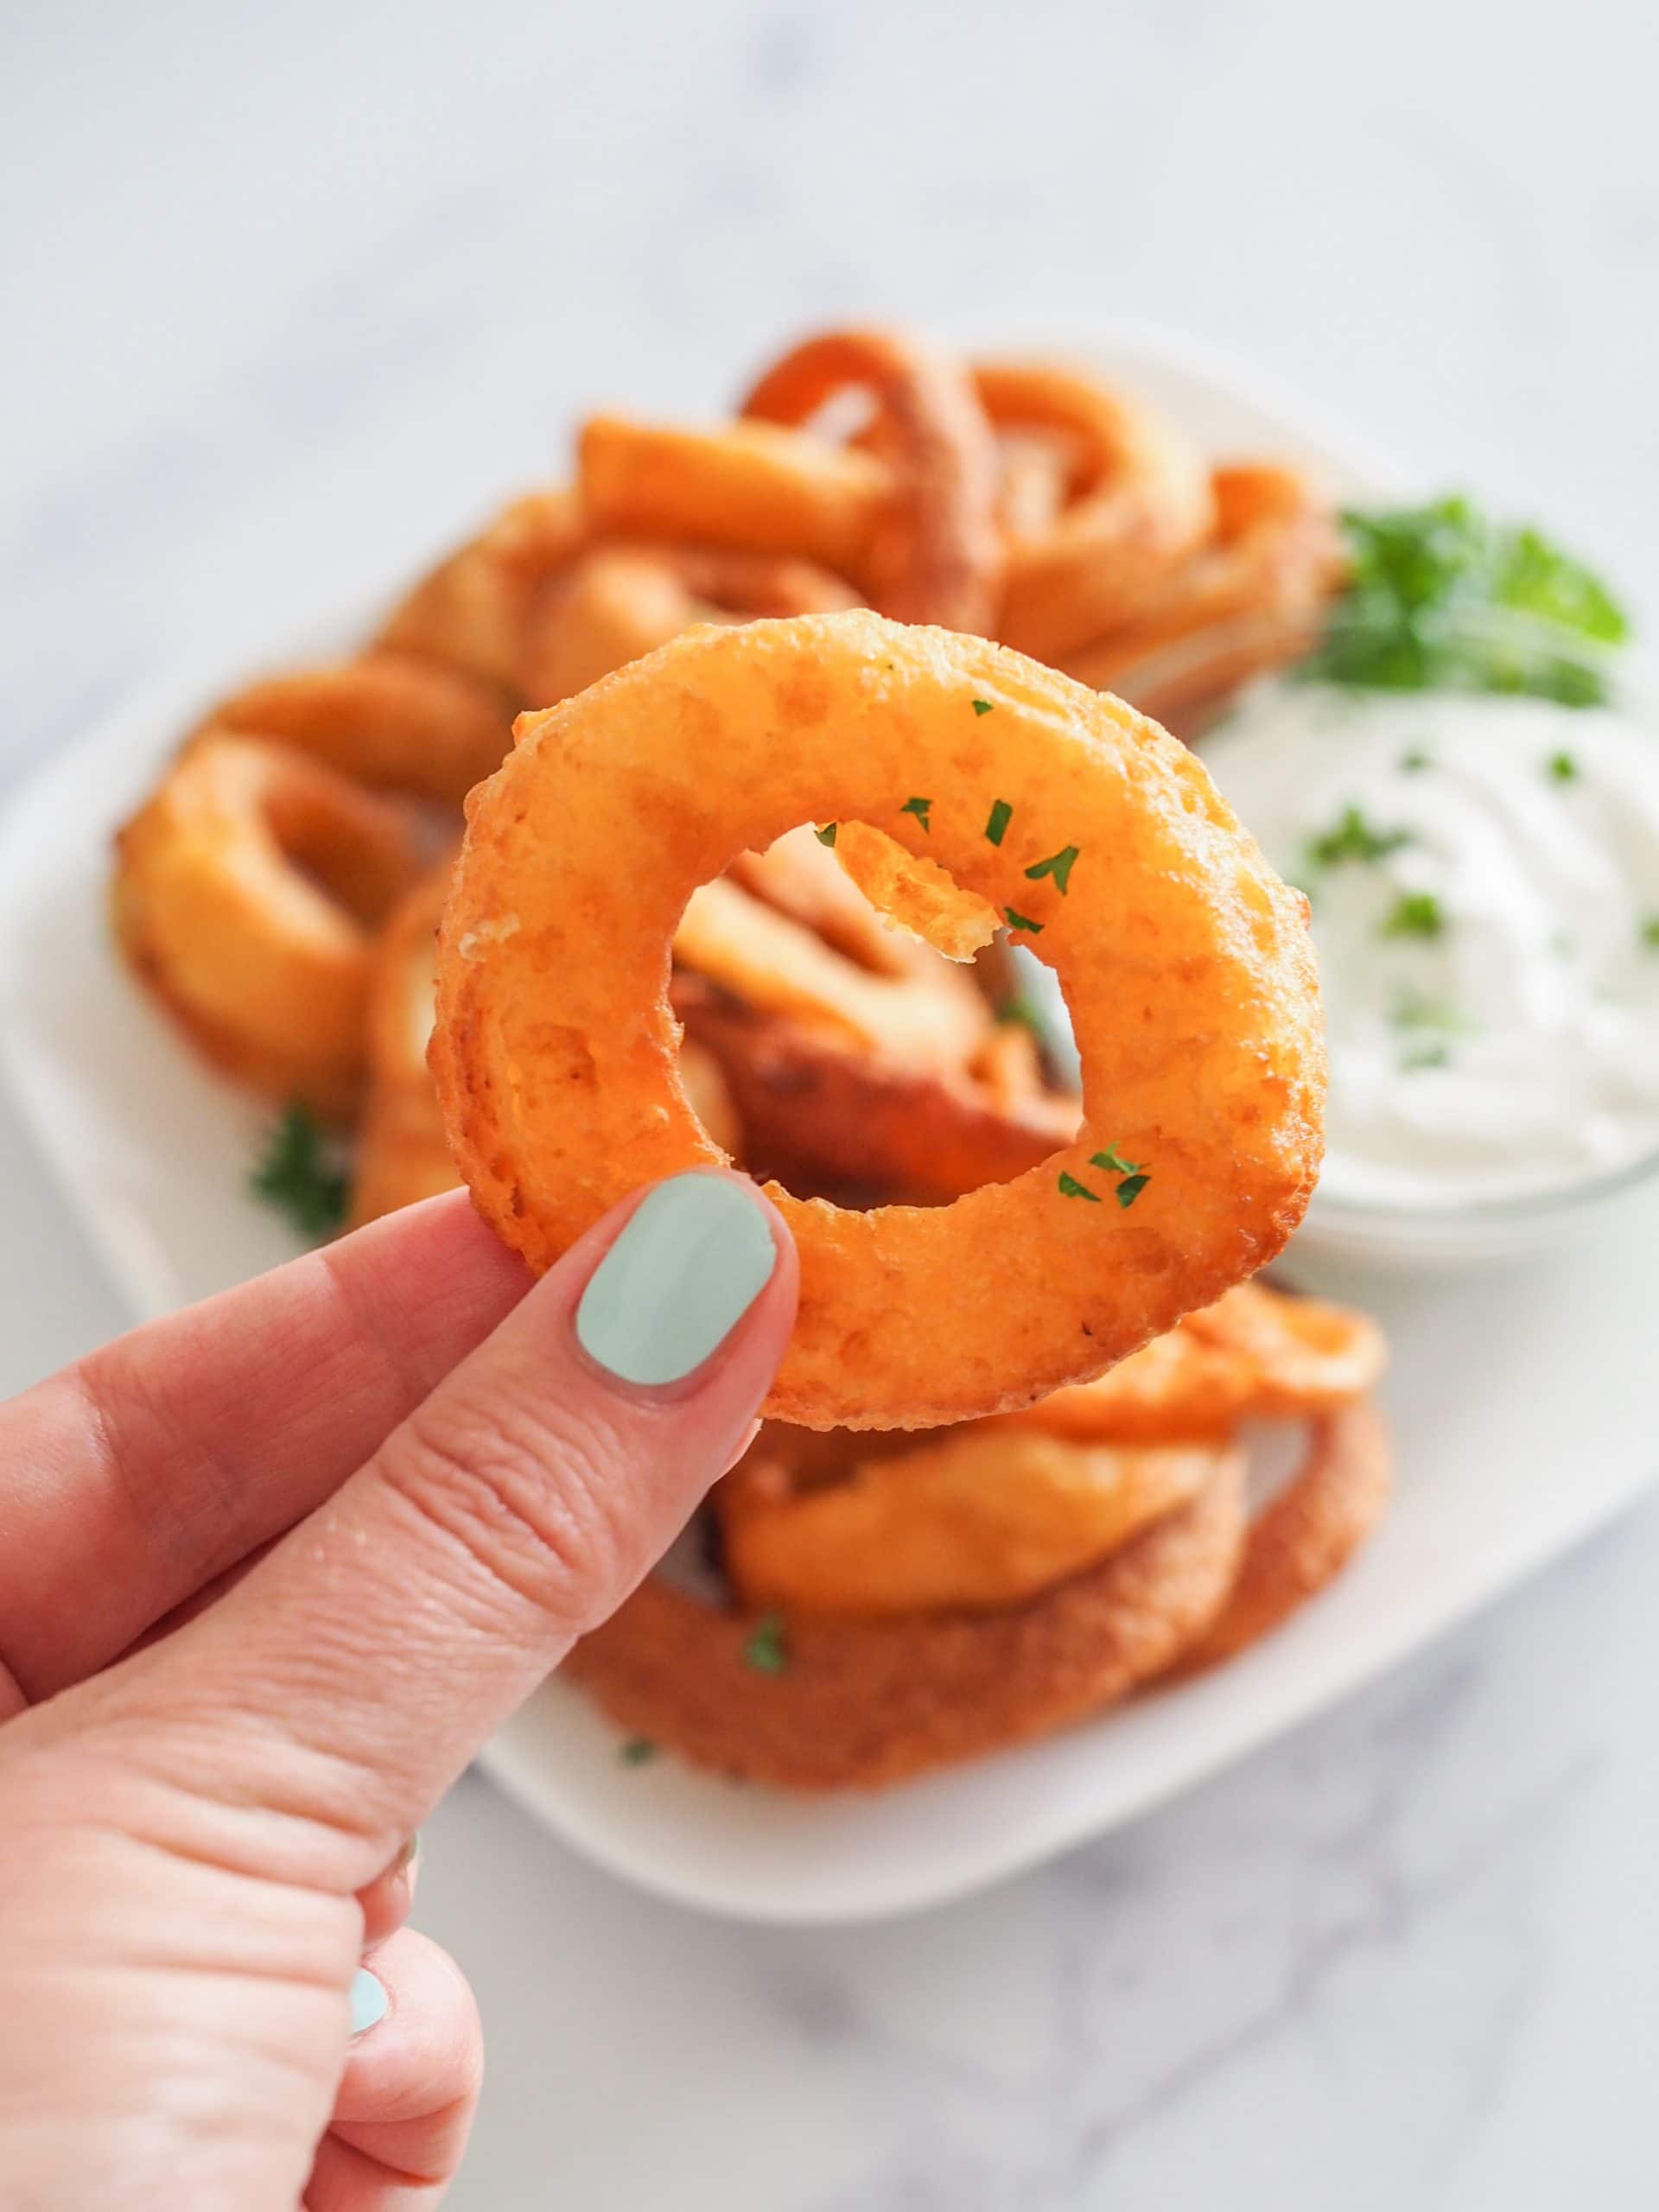 https://thetravelbite.com/wp-content/uploads/2021/08/Air-Fried-Frozen-Onion-Rings-TheTravelBite.com-8-scaled.jpg